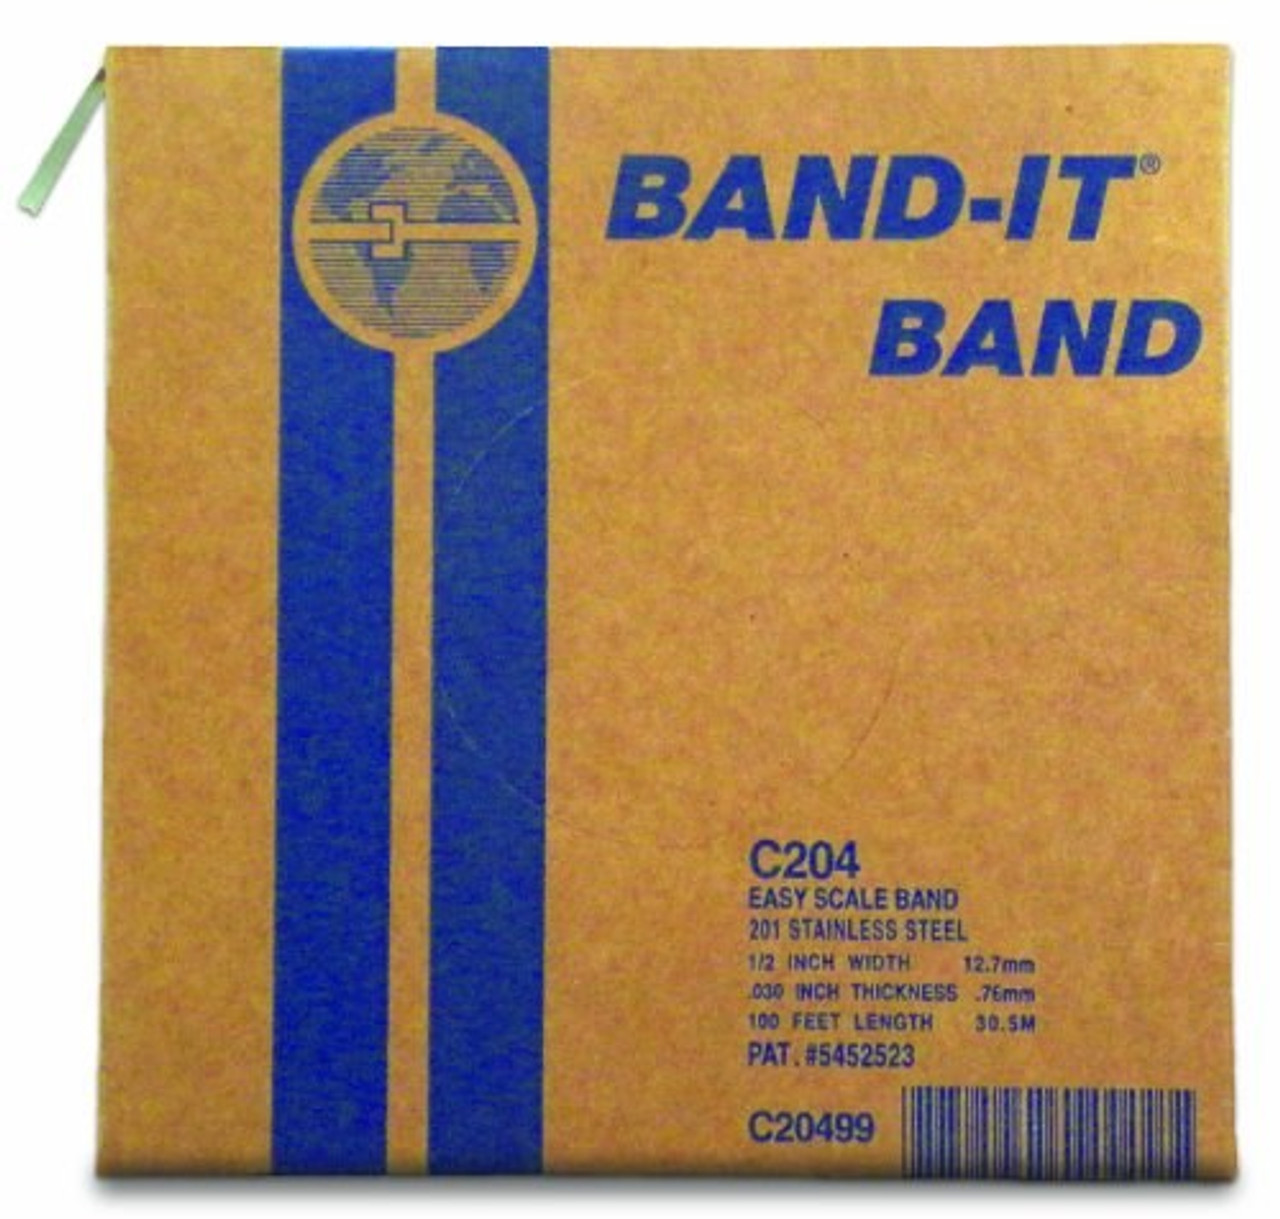 Band-It 201 Giant Stainless Steel Banding